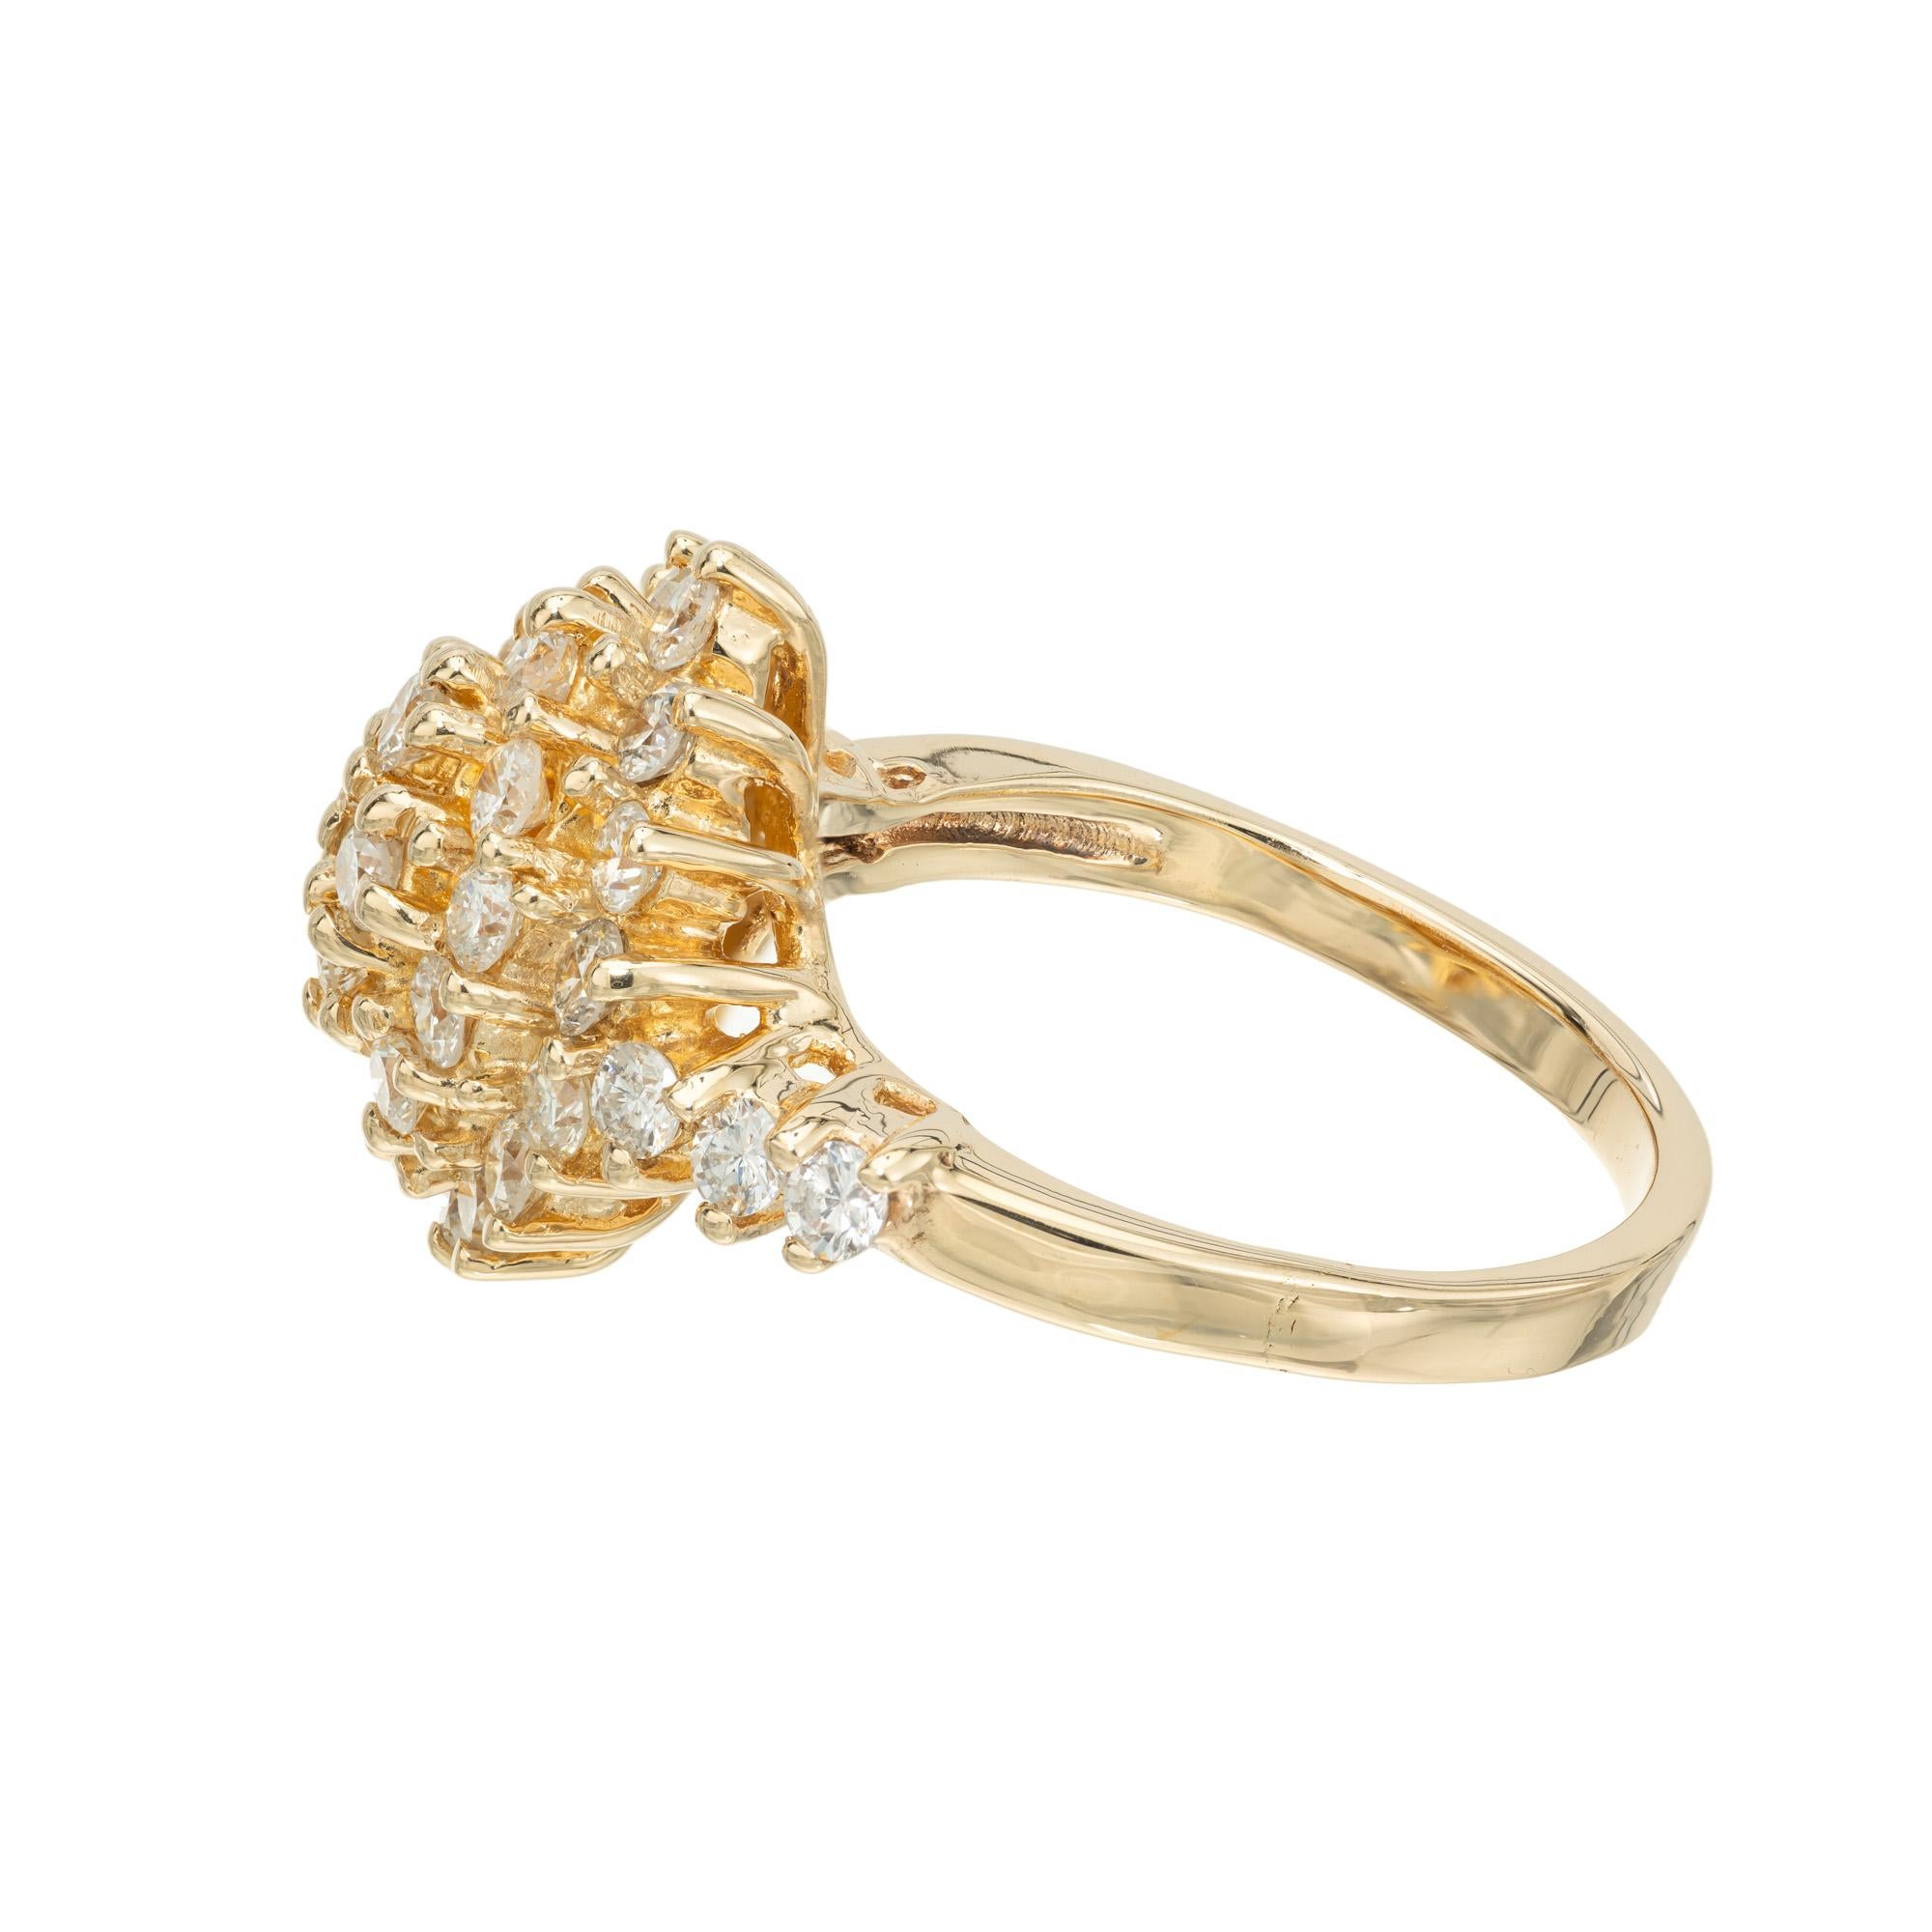 1.25 Carat Round Diamond Yellow Gold Dome Cluster Ring In Excellent Condition For Sale In Stamford, CT